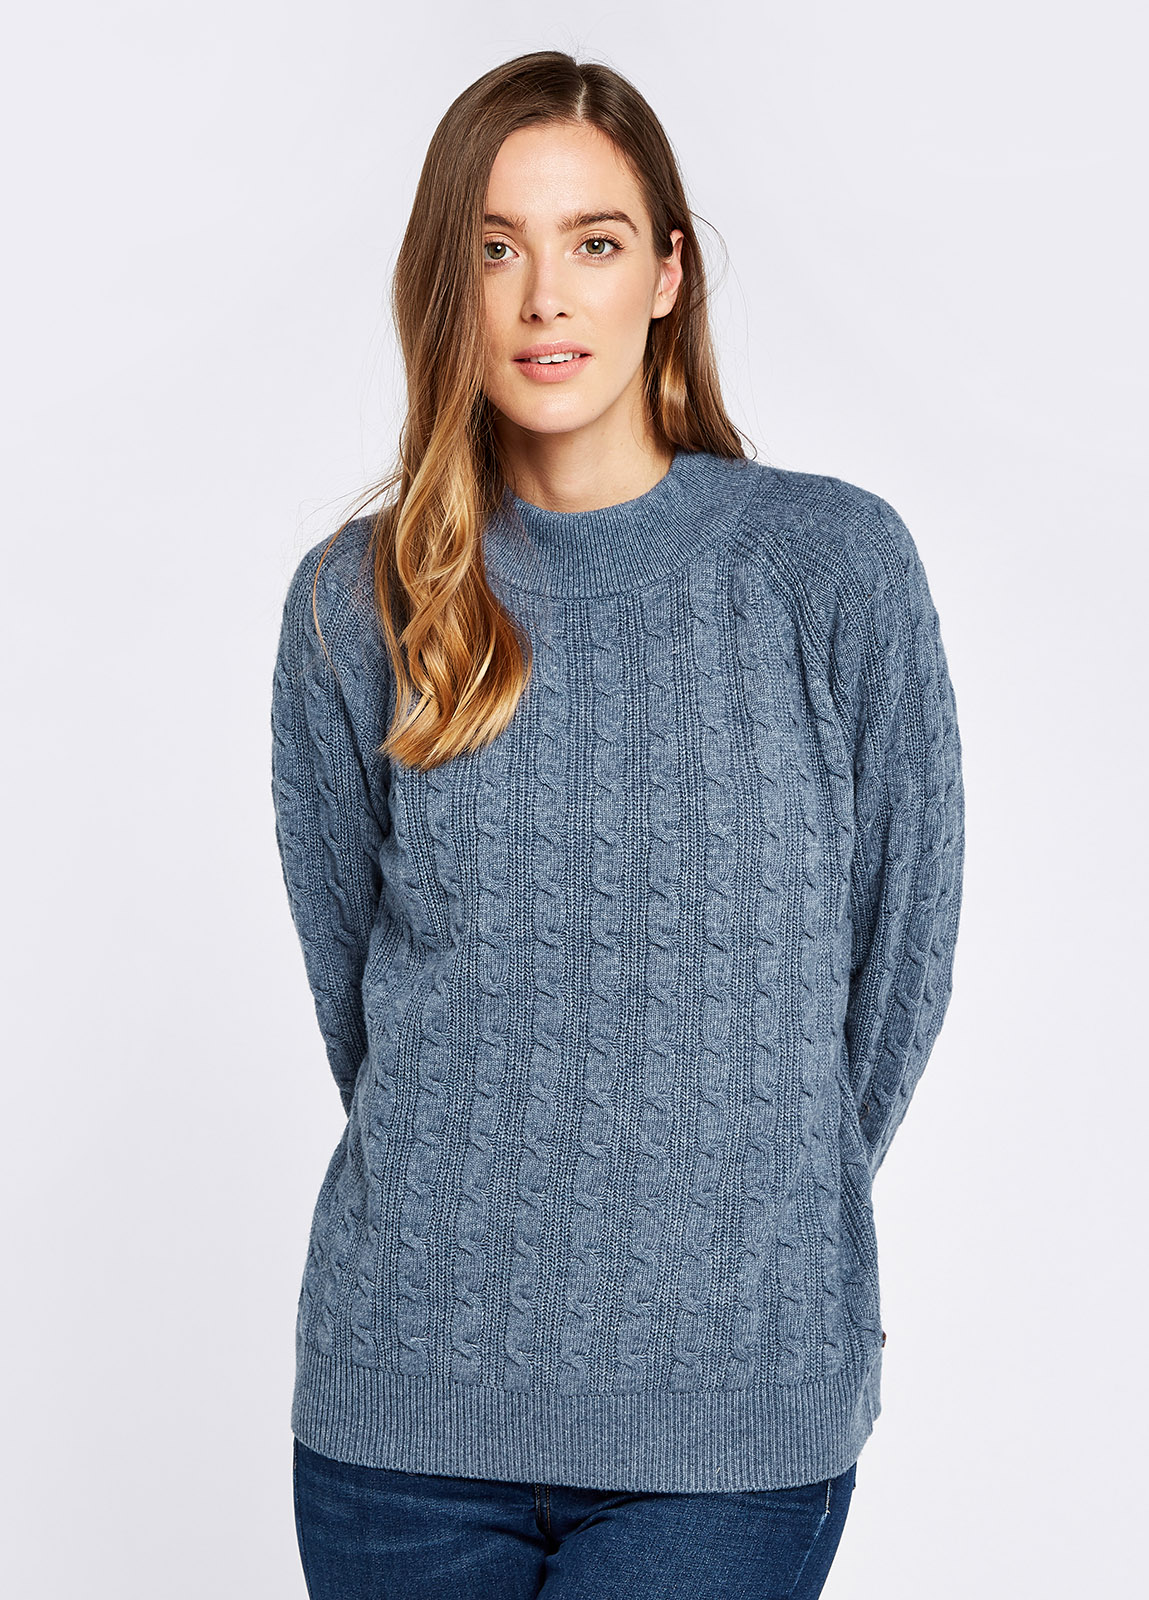 Tallanstown Knitted Sweater - Slate Blue